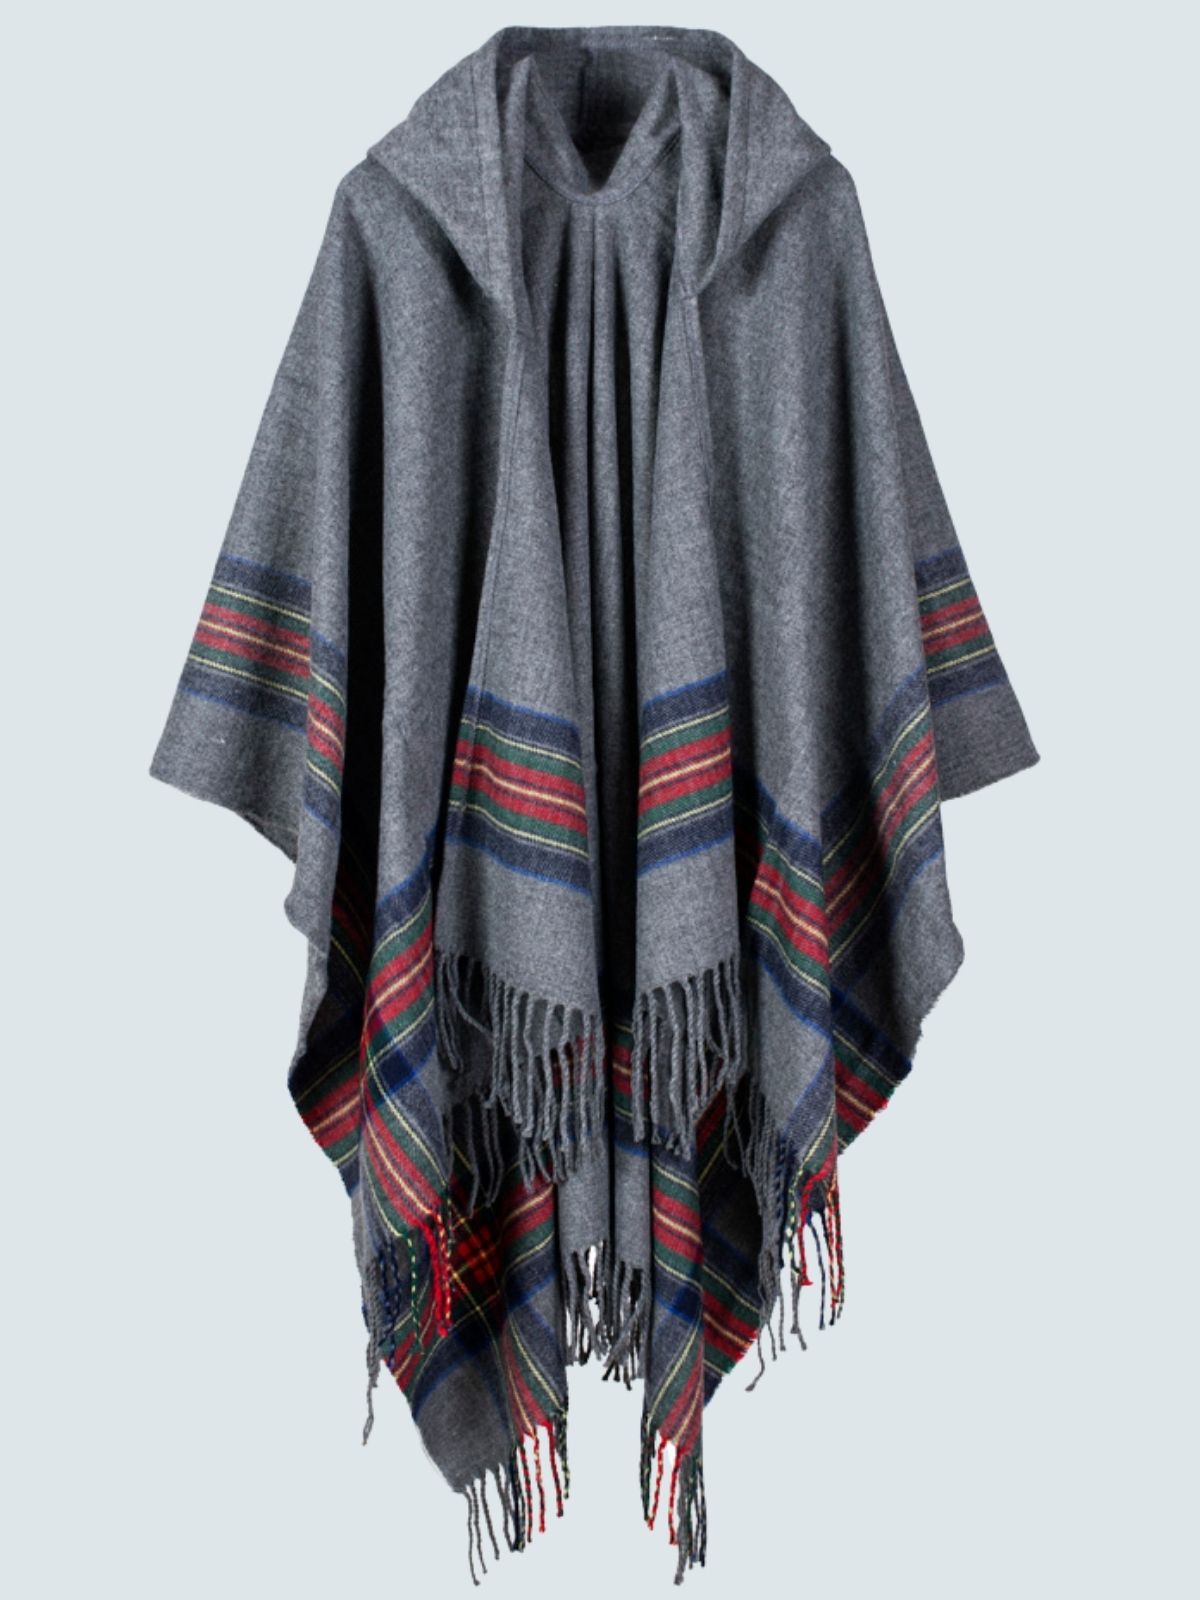 Women's Picturesque Hooded Poncho Cardigan Grey